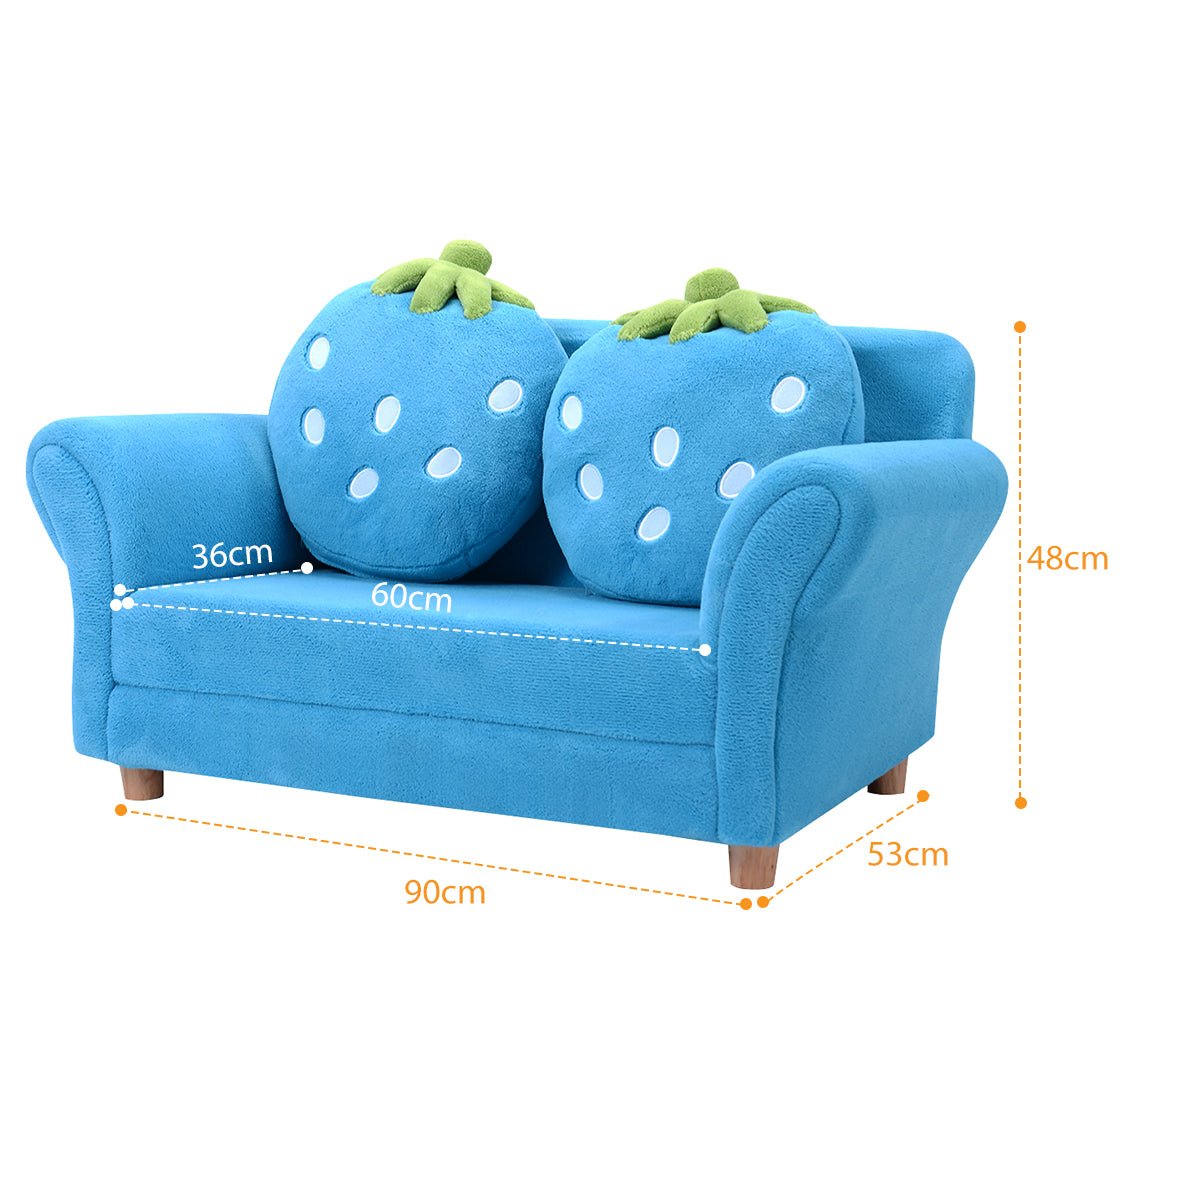 Kids Lounge Bed: 2-Seat Sofa with Playful Strawberry Pillows for Children